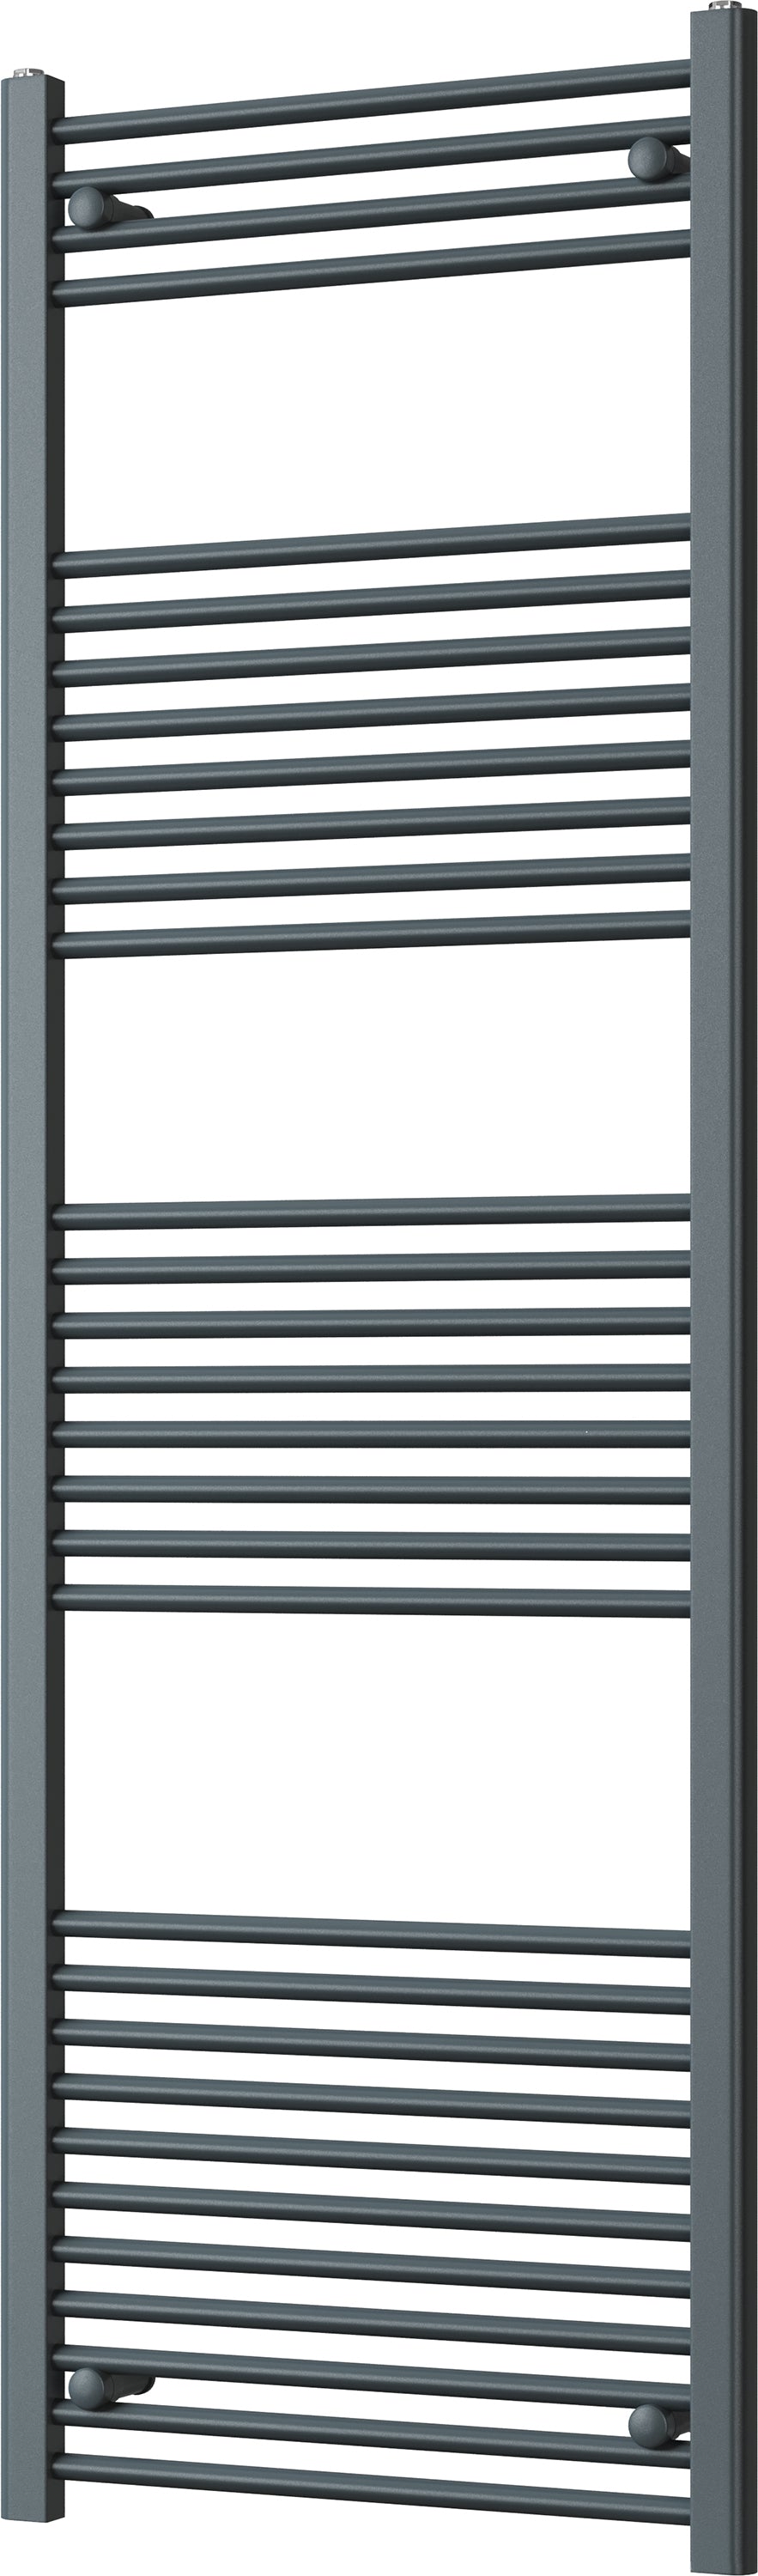 Zennor - Anthracite Heated Towel Rail - H1800mm x W600mm - Straight